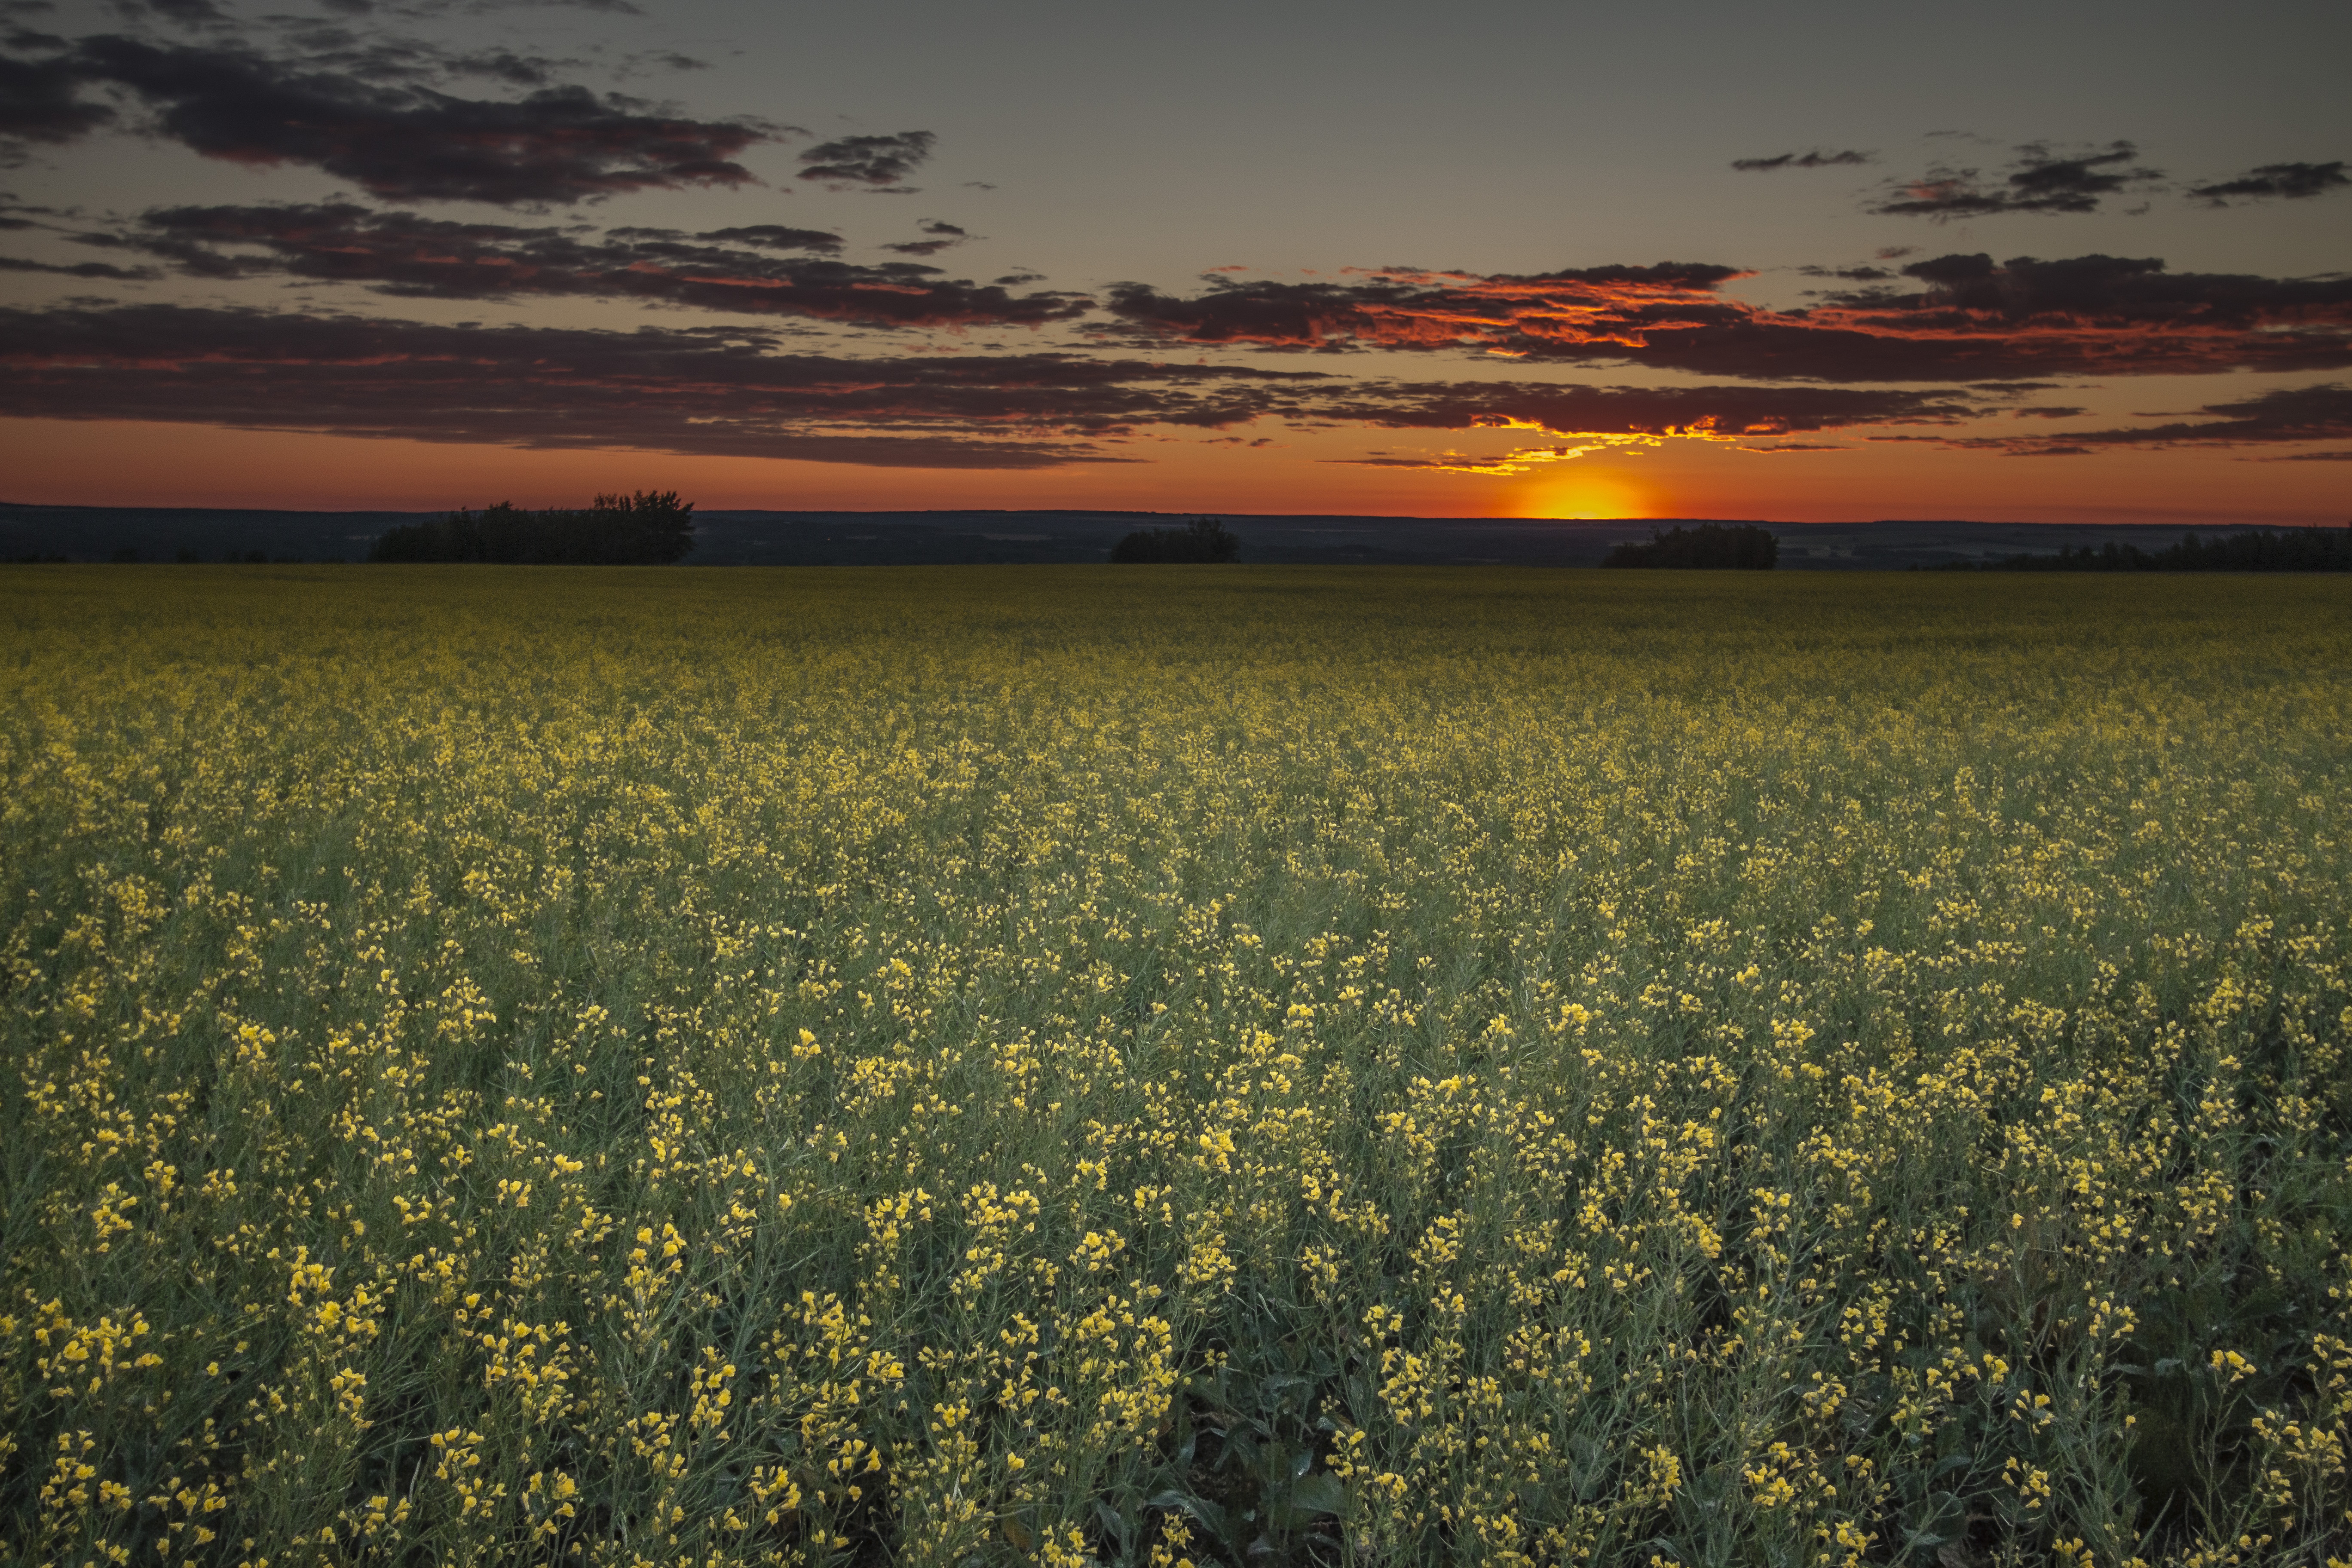 Field of yellow wildflowers extends toward the horizon as the sun sets.